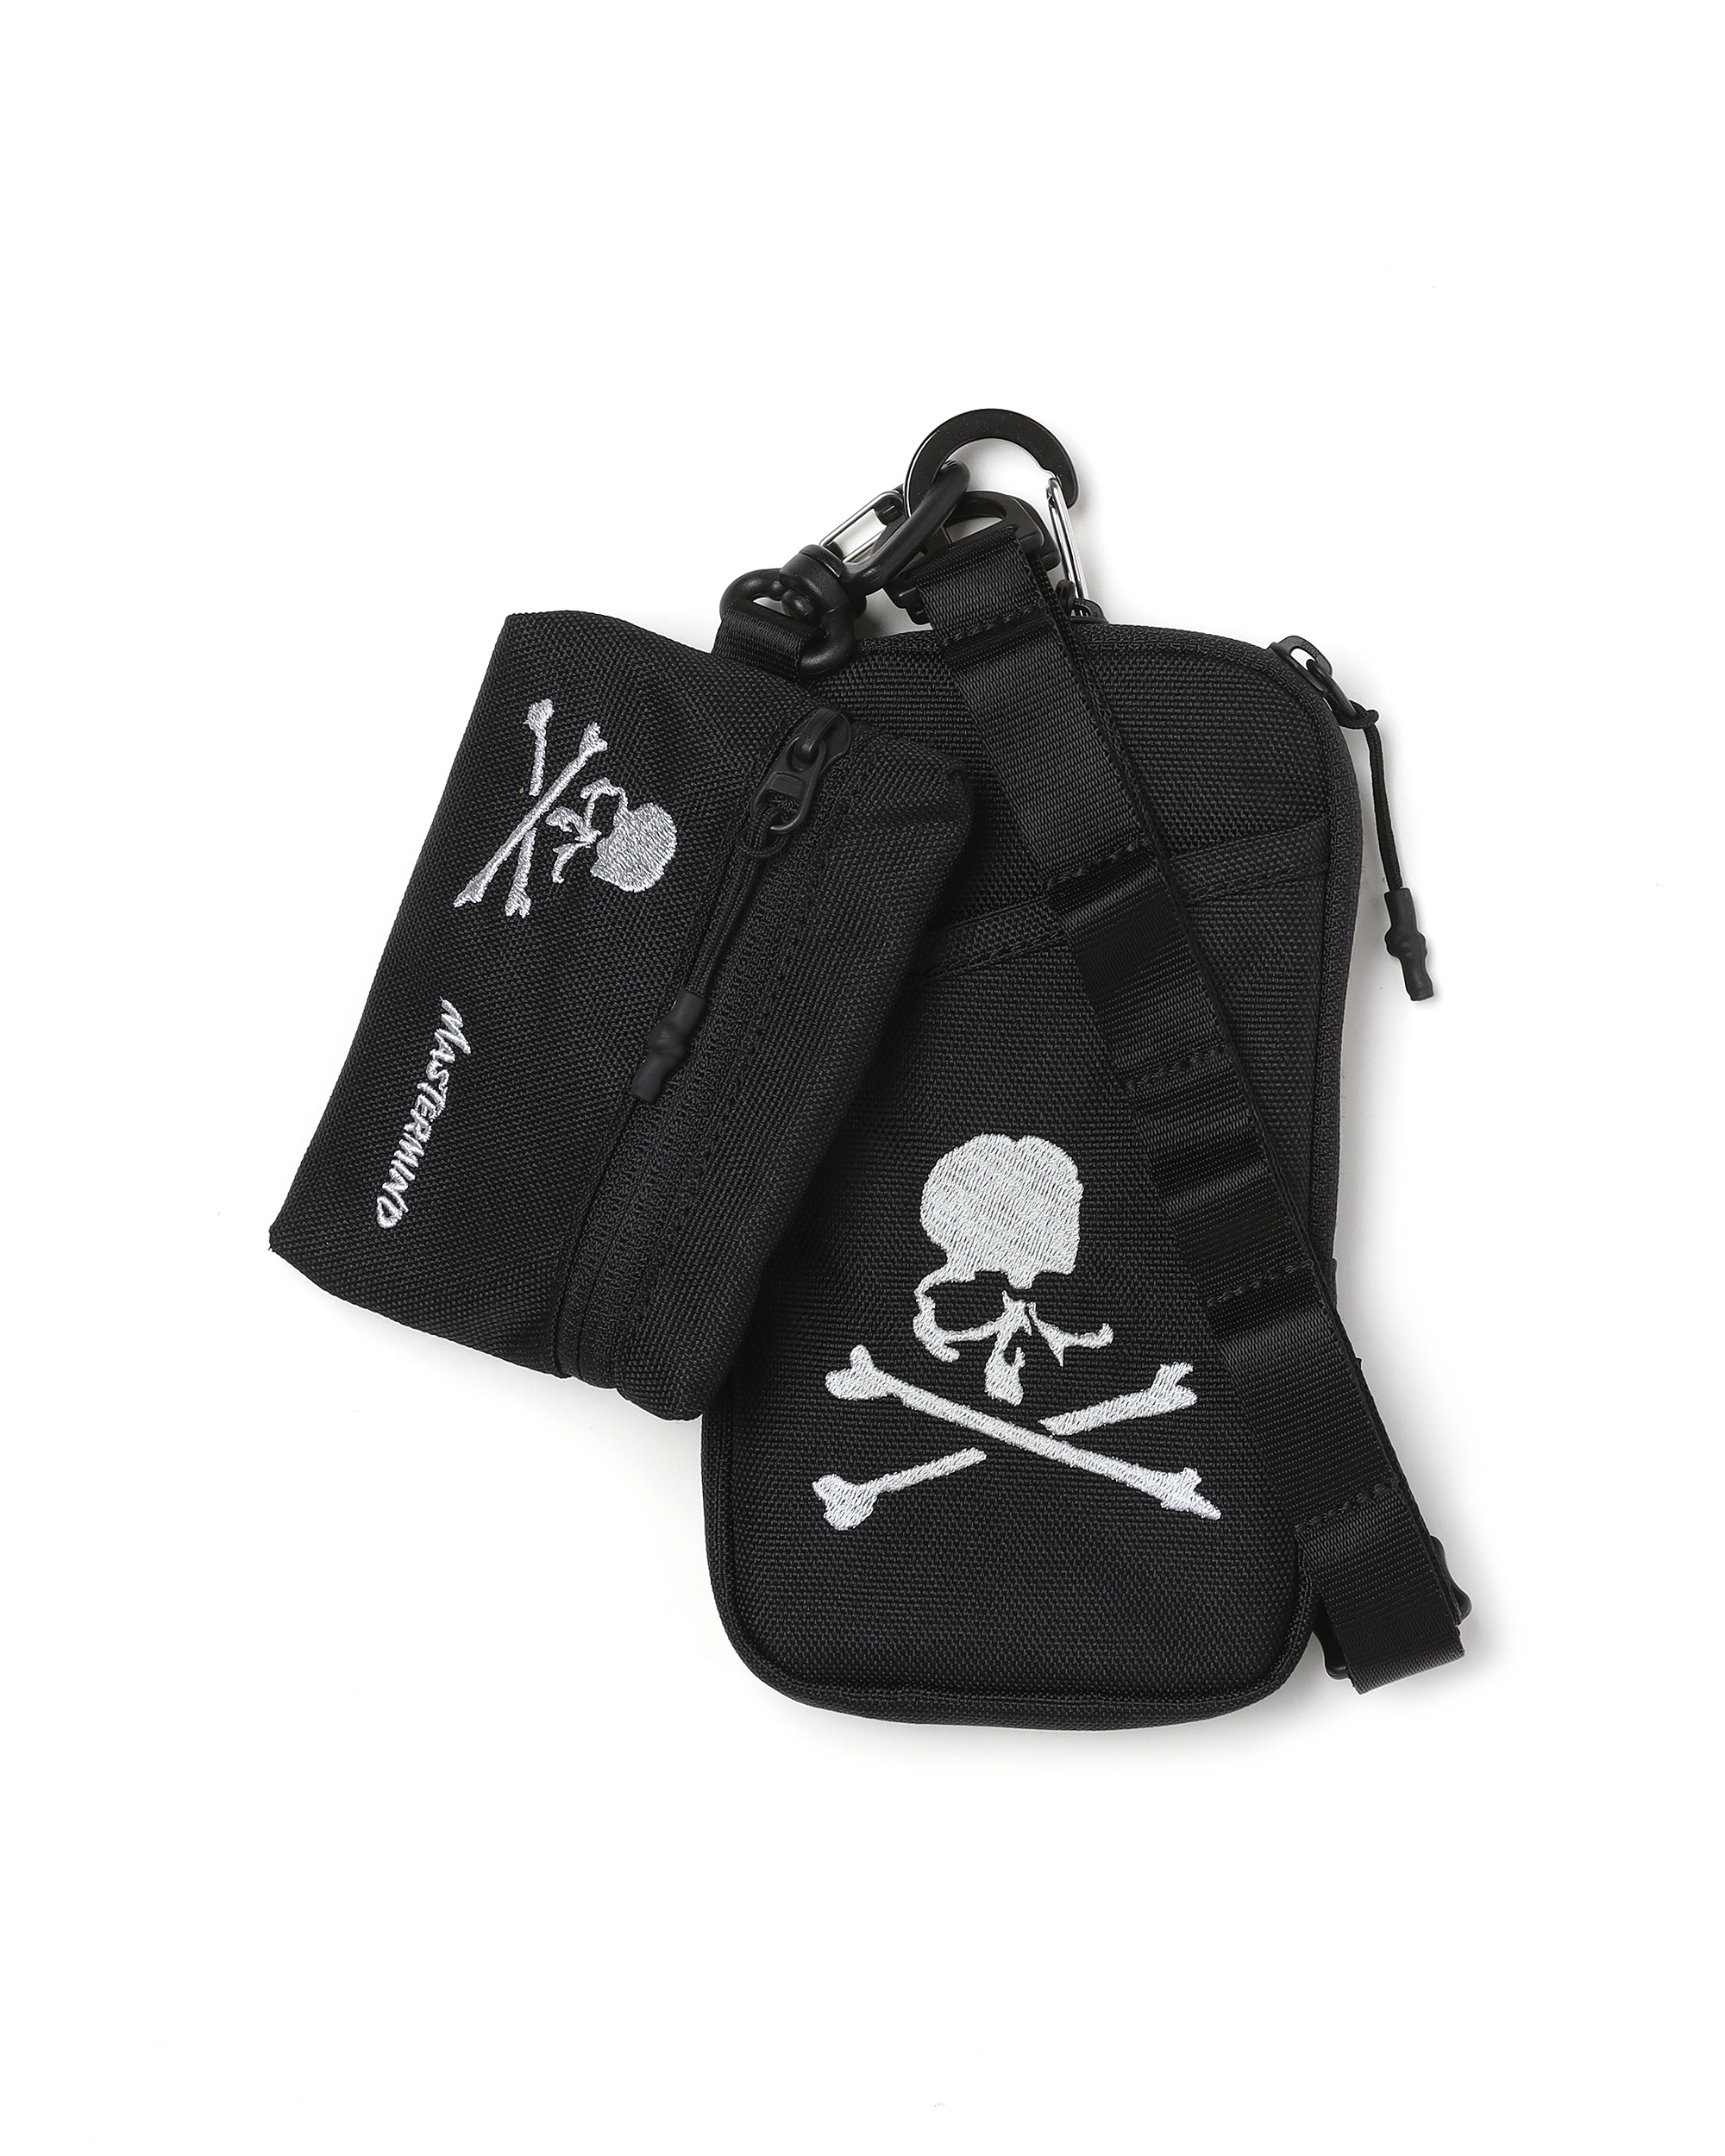 WILD THINGS x mastermind JAPAN pouch | ITeSHOP